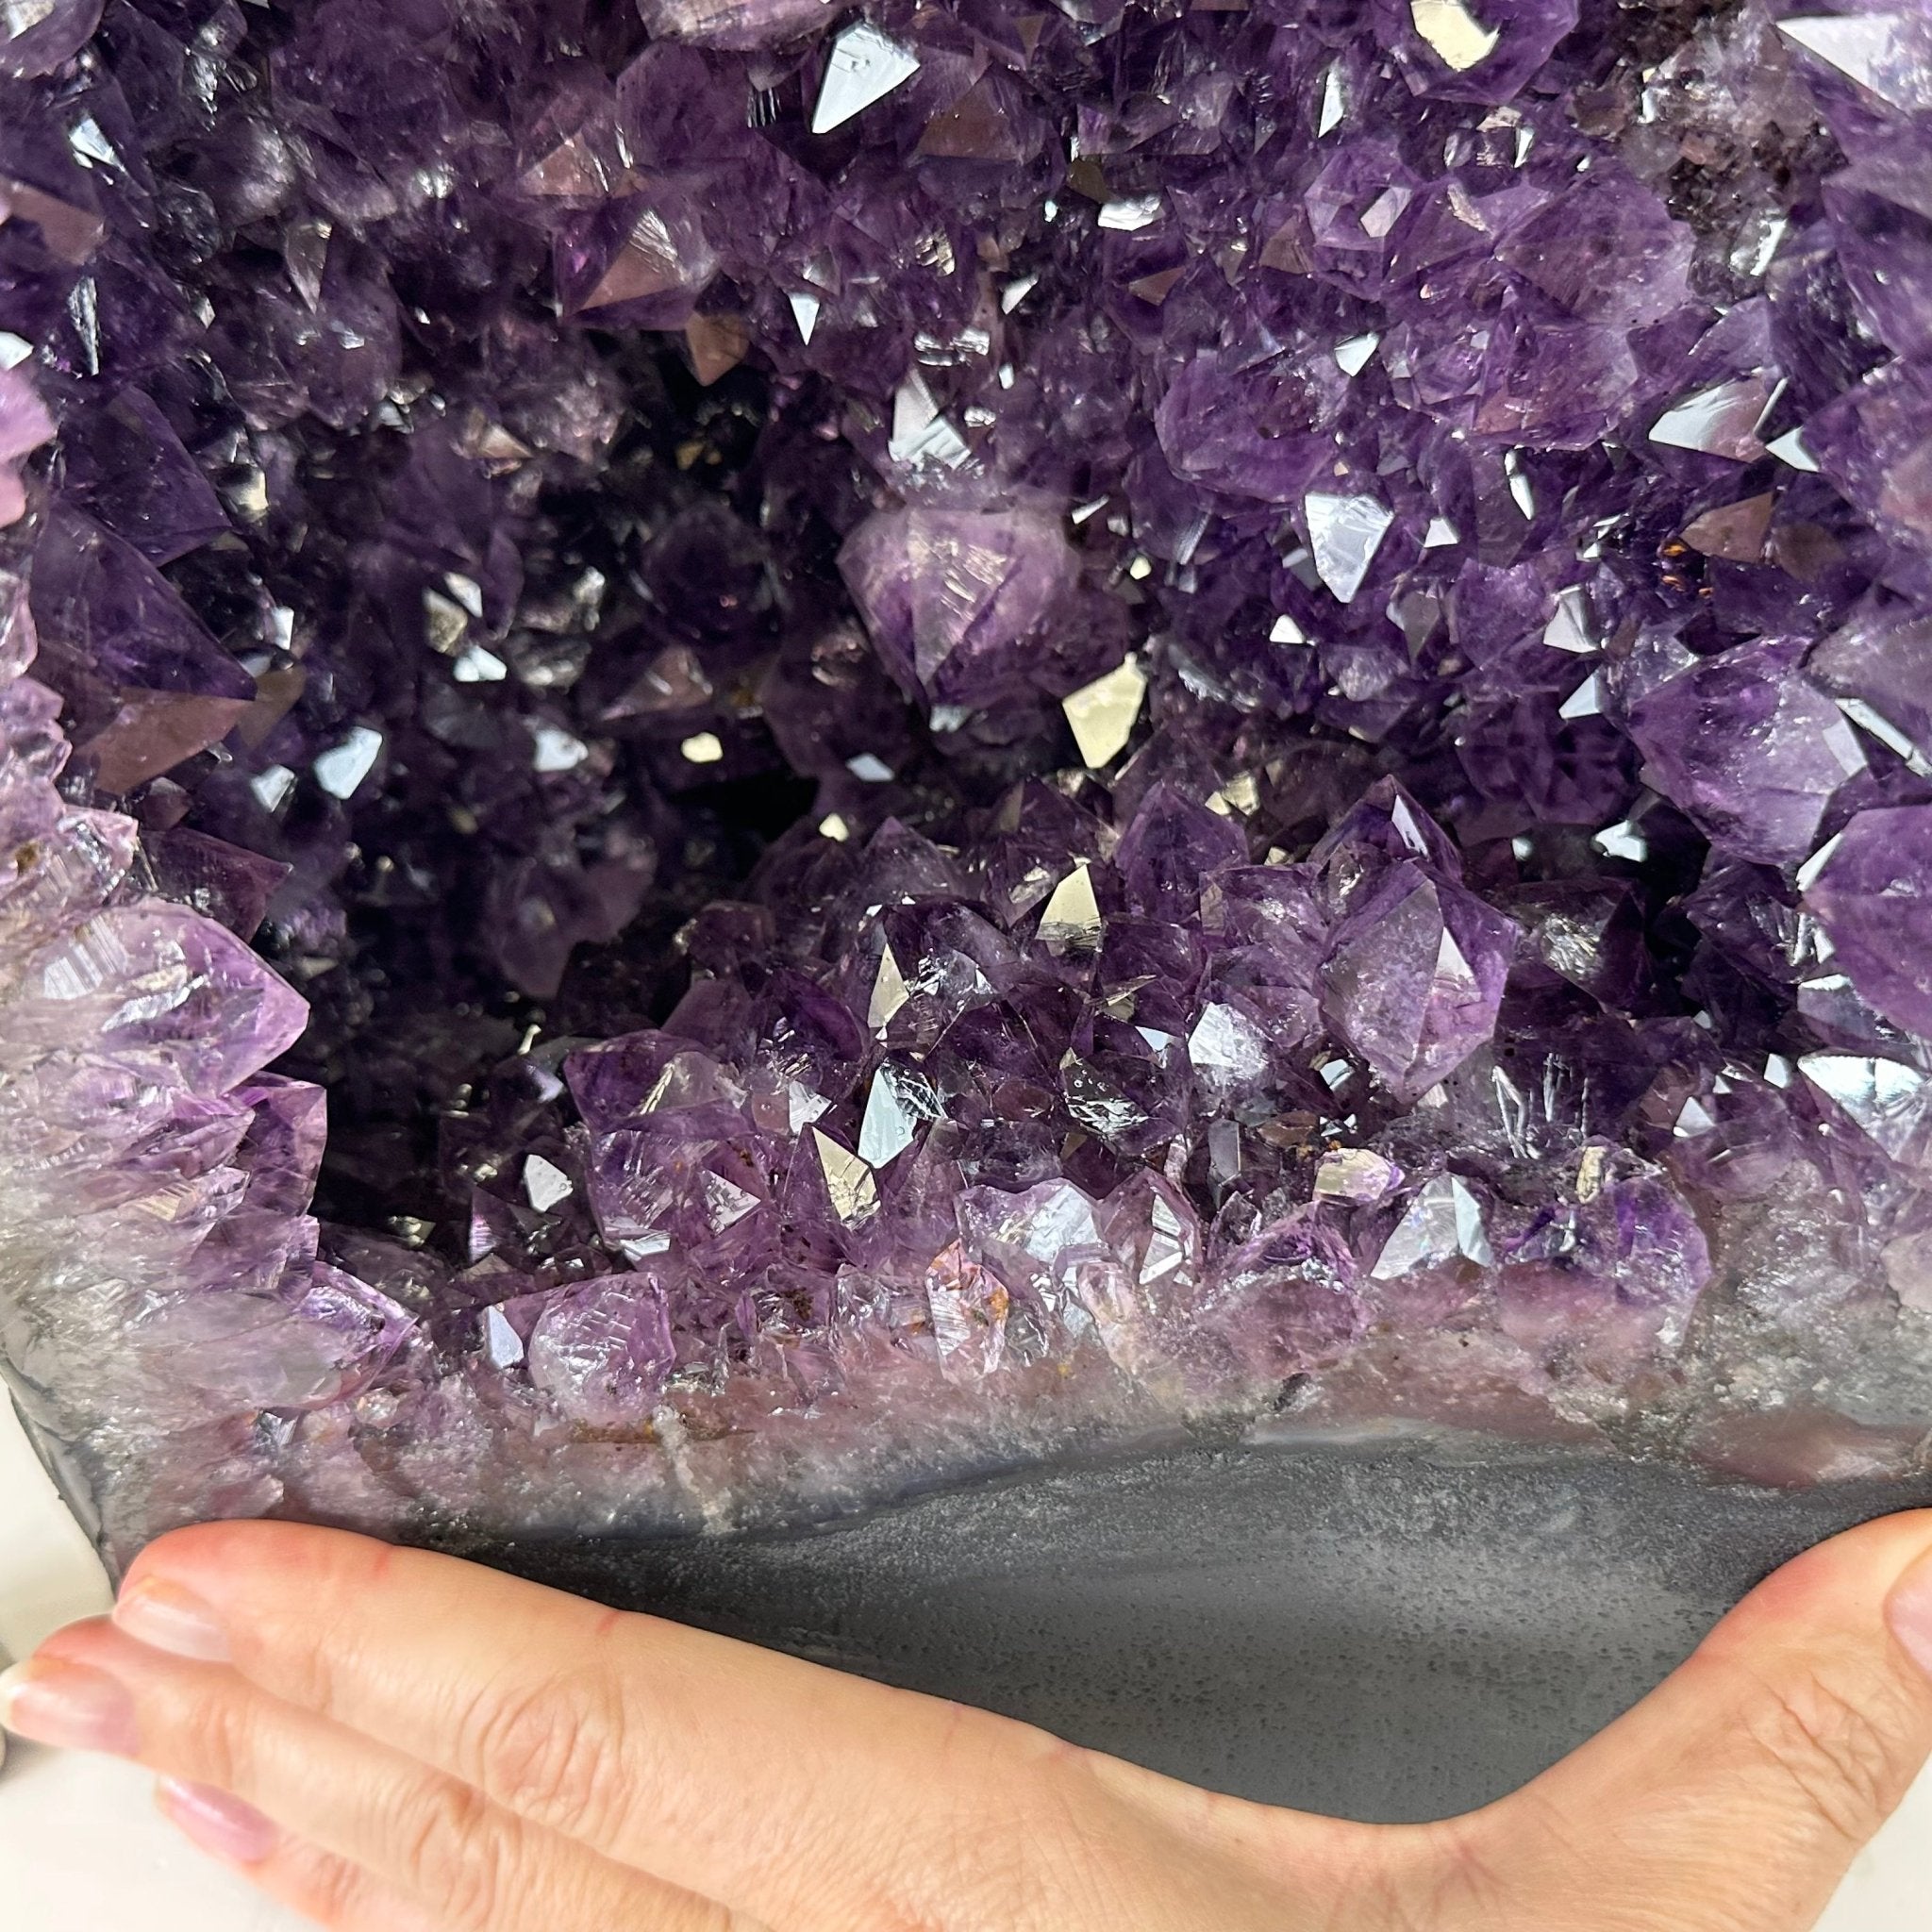 Extra Plus Quality Brazilian Amethyst Cathedral, 60.7 lbs & 29.5" Tall, Model #5601-1294 by Brazil Gems - Brazil GemsBrazil GemsExtra Plus Quality Brazilian Amethyst Cathedral, 60.7 lbs & 29.5" Tall, Model #5601-1294 by Brazil GemsCathedrals5601-1294